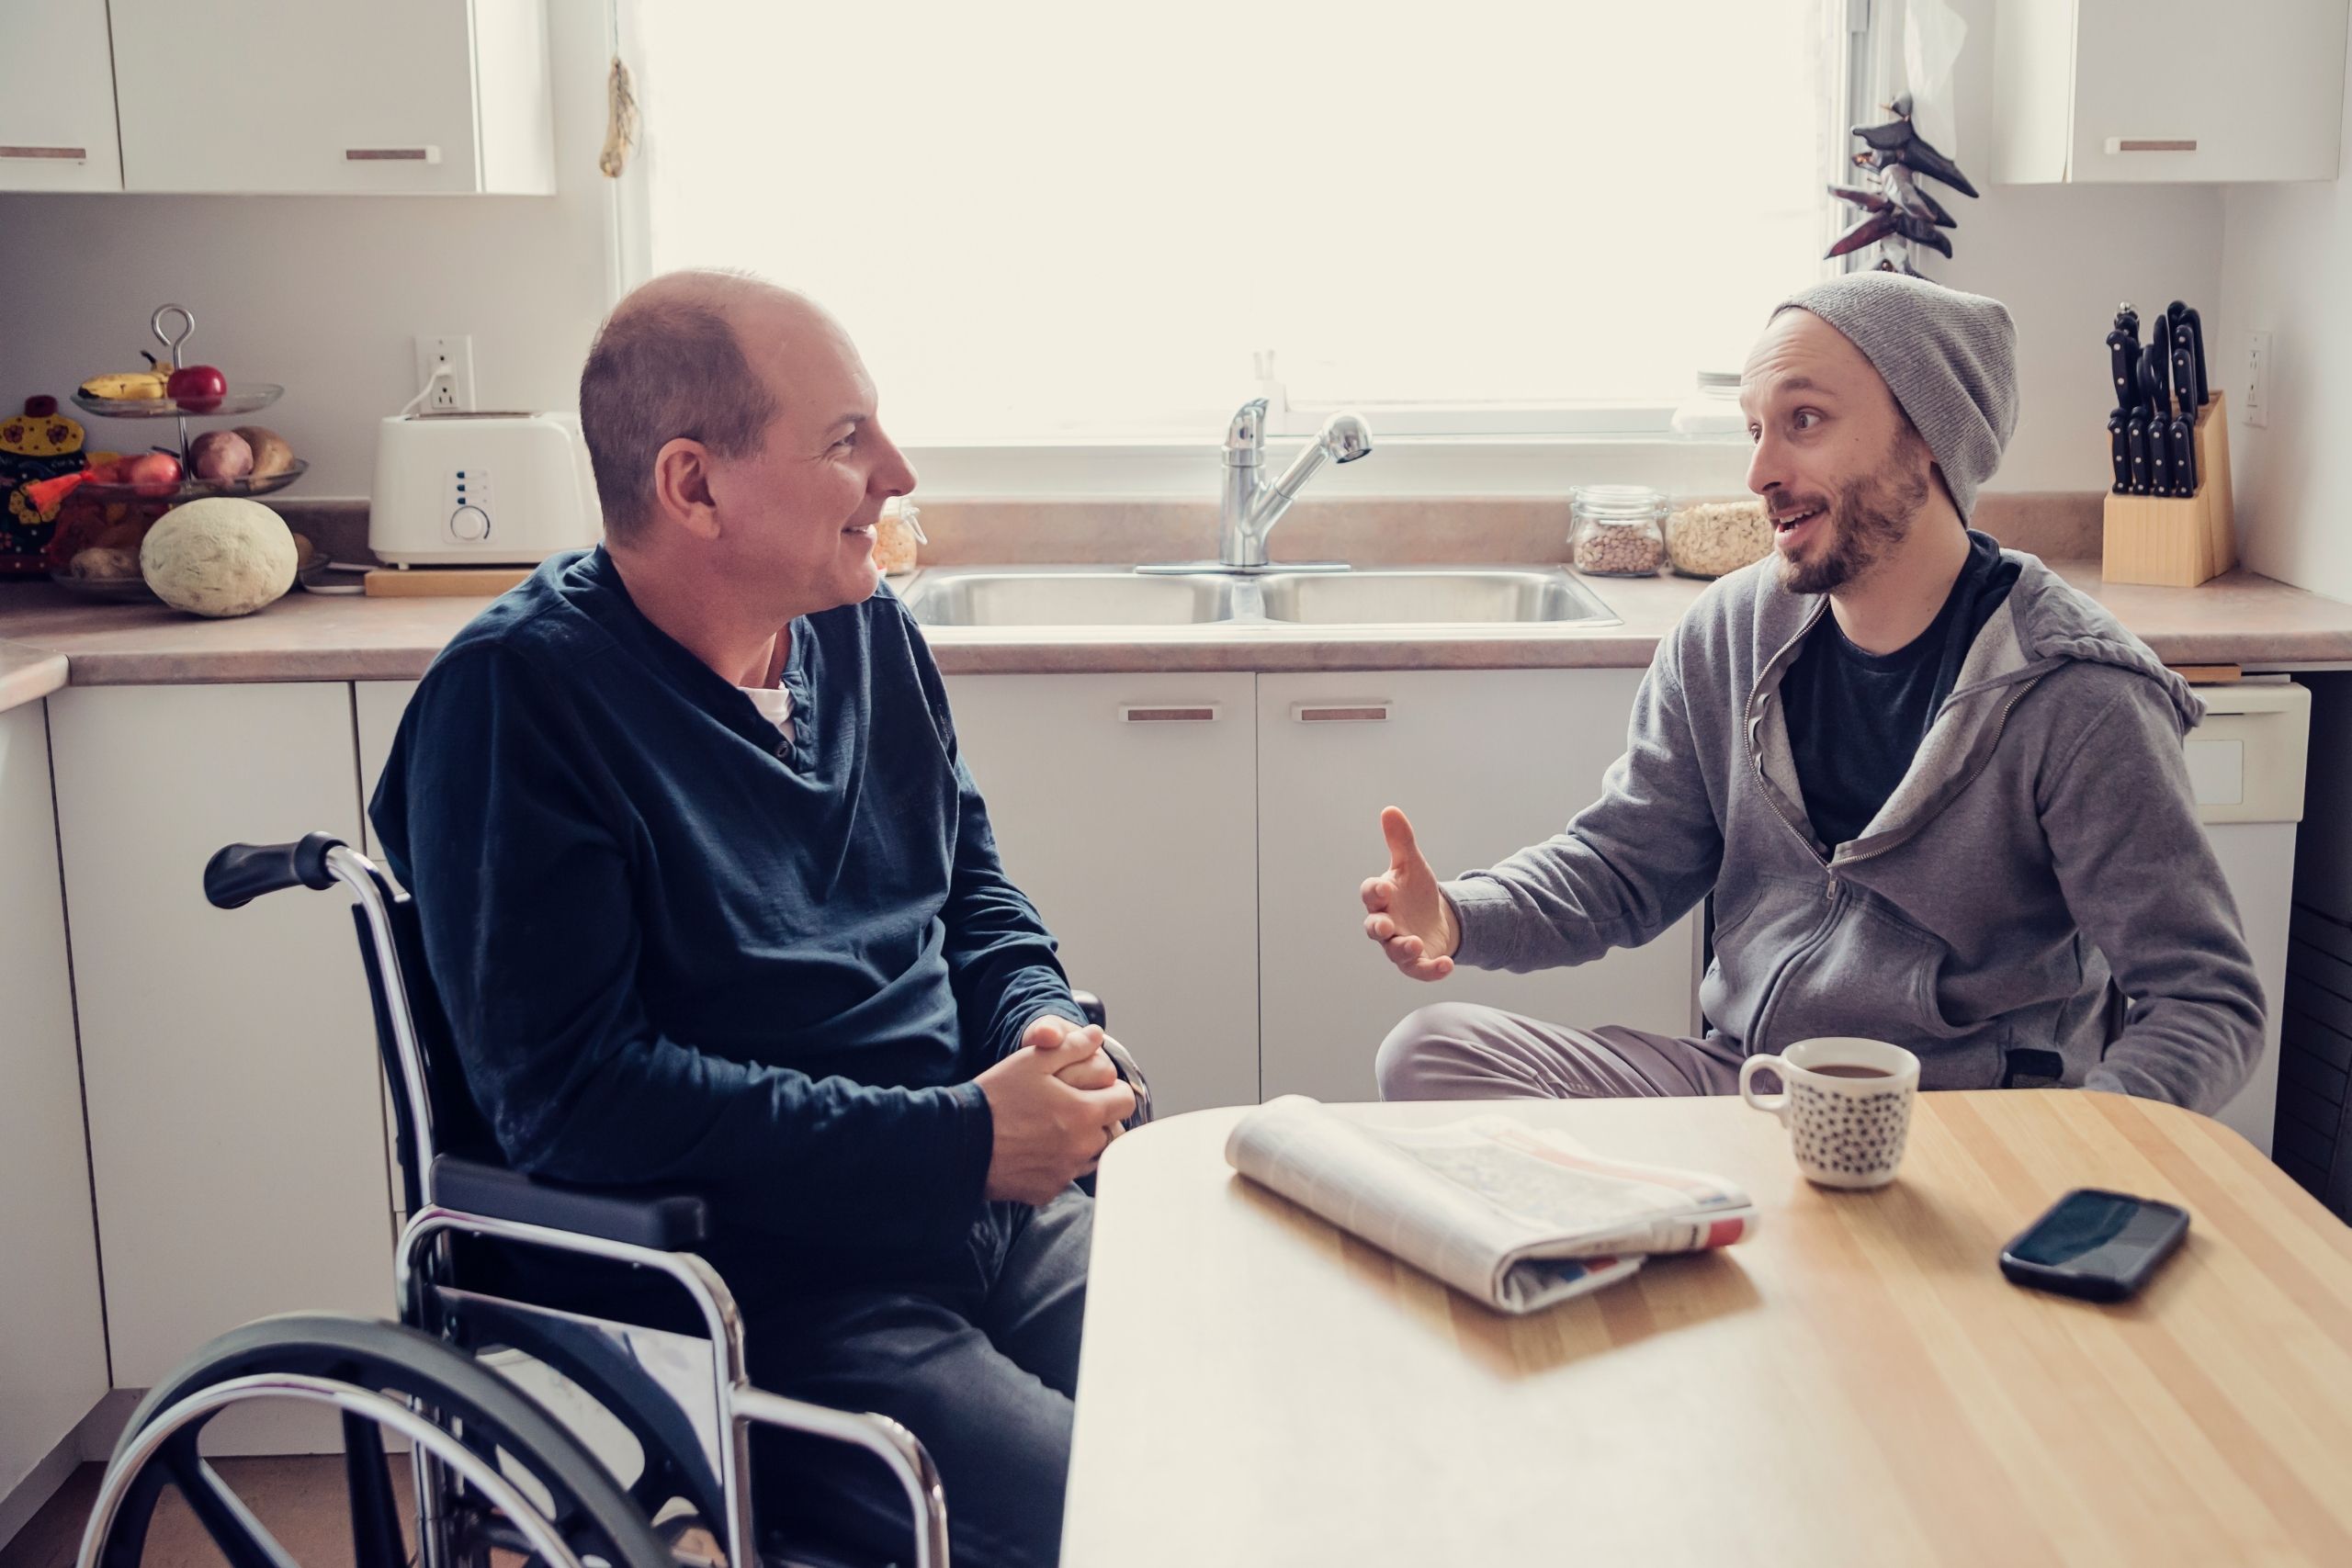 Man in wheelchair speaking to another man sat at a table in a kitchen